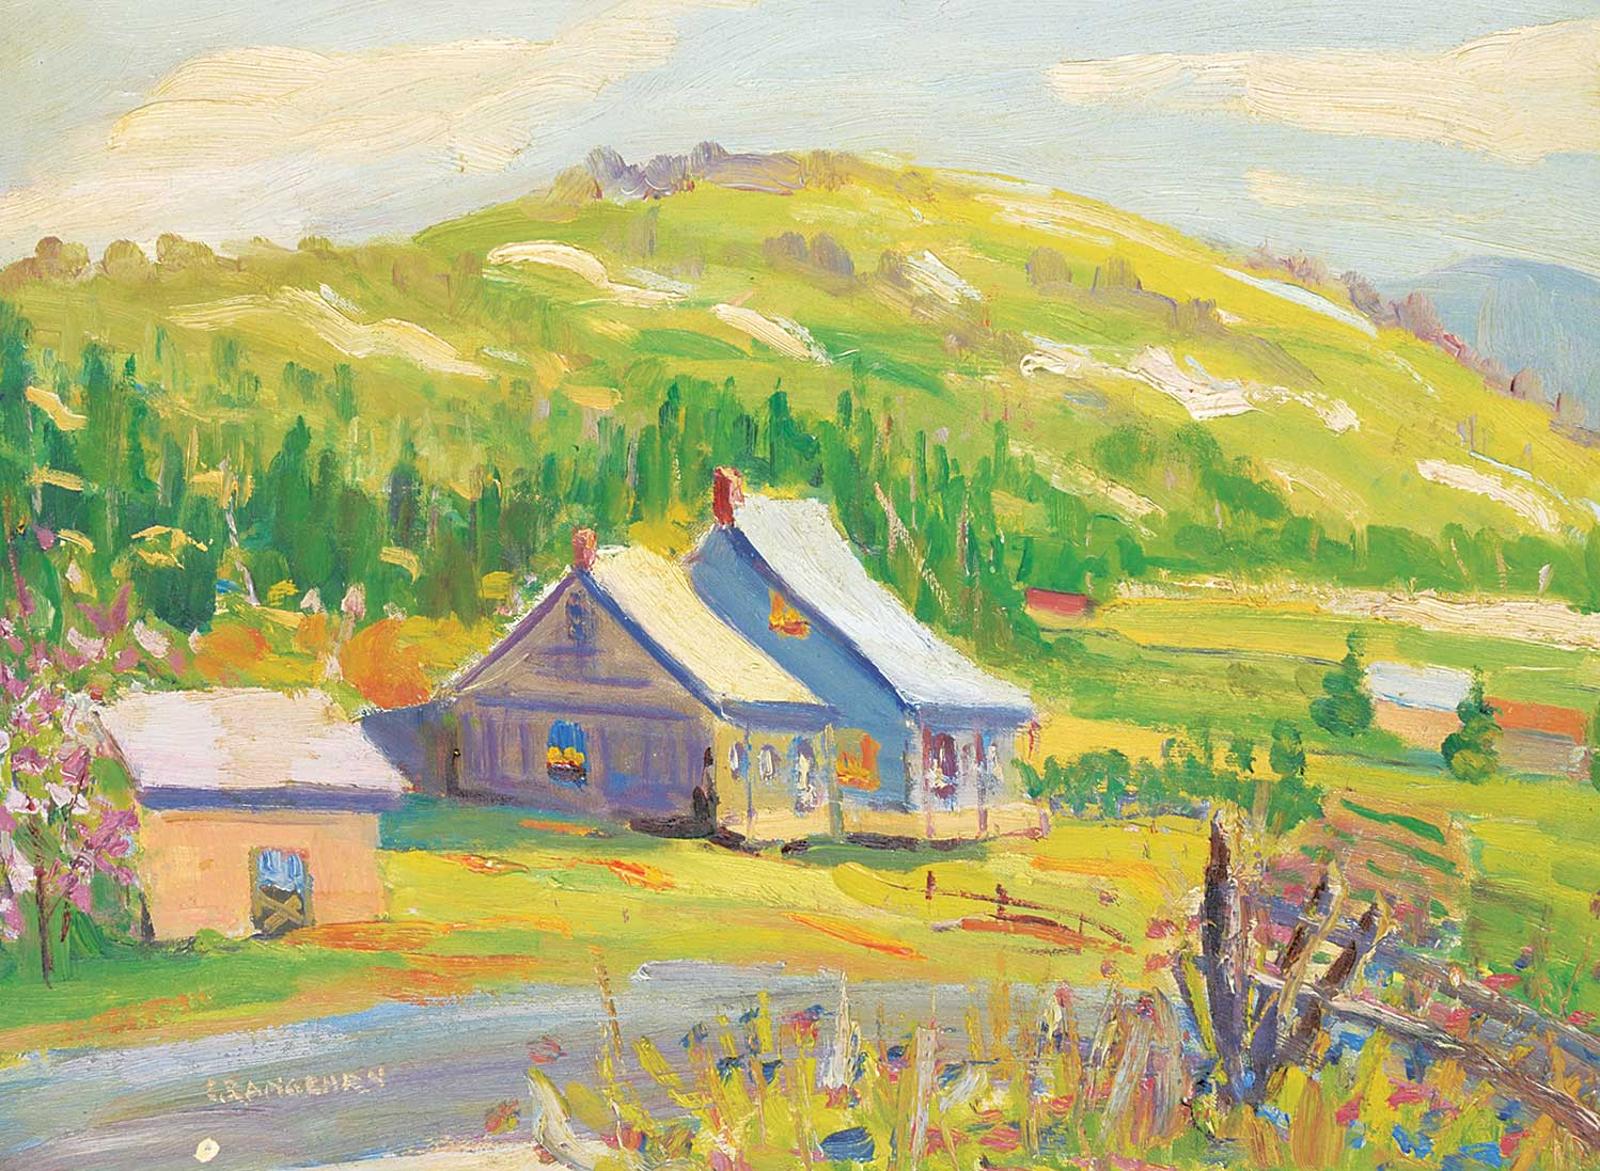 Quebec School - Untitled - The Old Farm